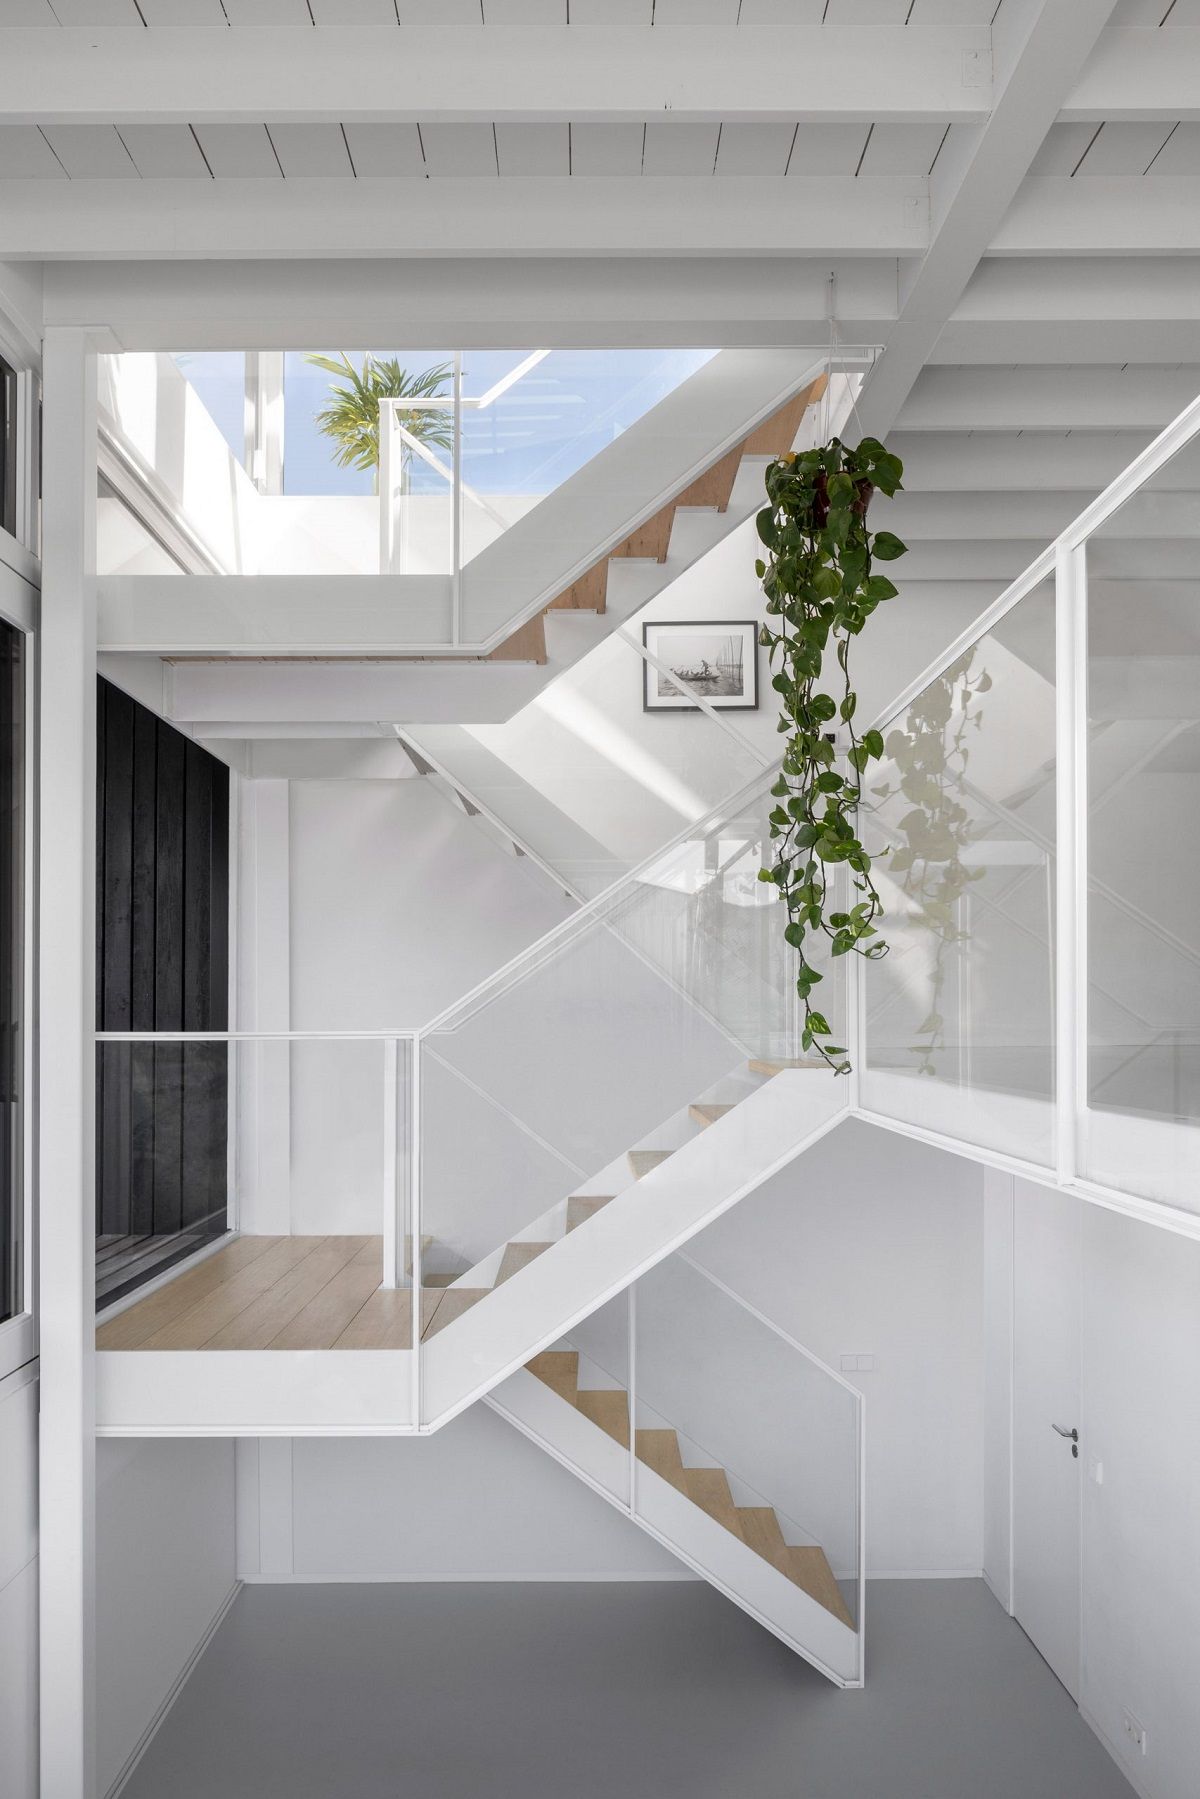 floating home i29 amsterdam architecture residential dezeen 2364 col 4 scaled 1